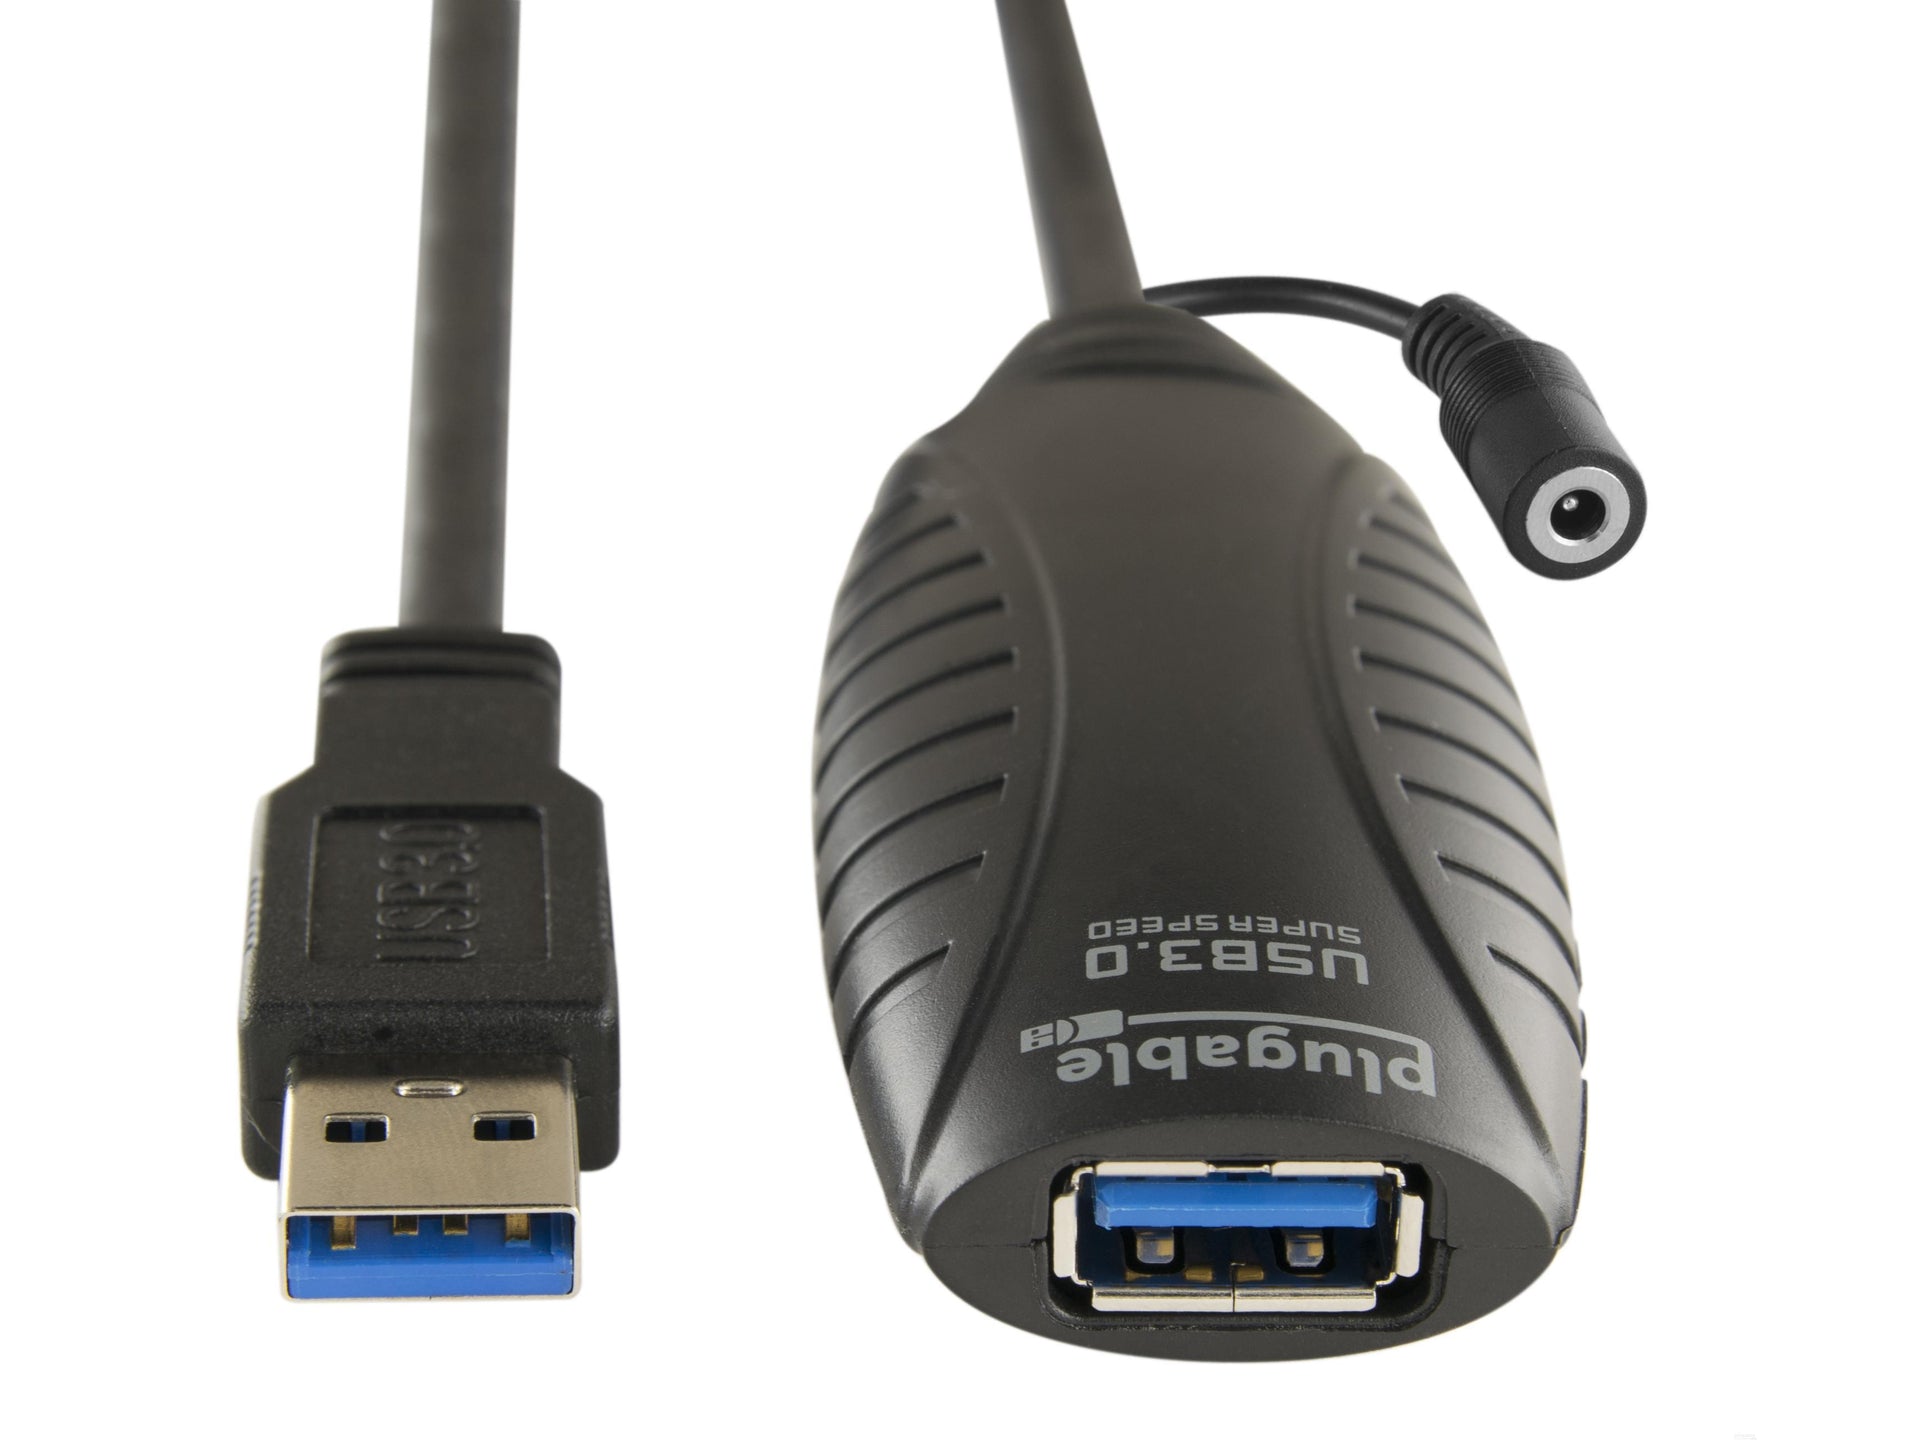 Plugable USB 3.0 10M (32ft) Extension Cable with Power Adapter and